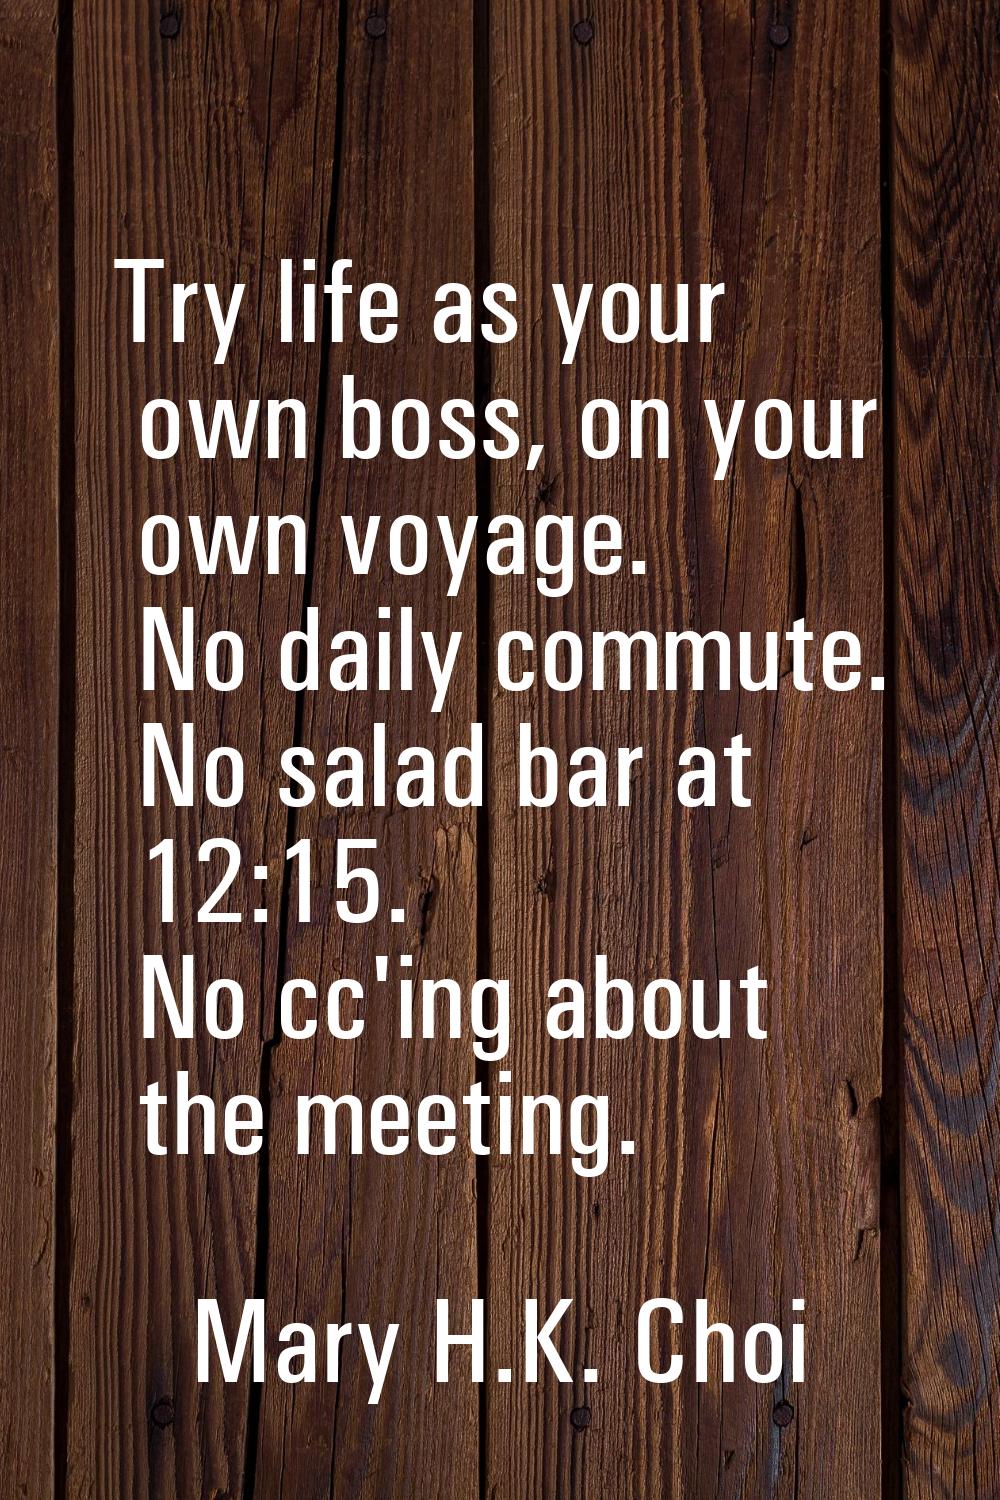 Try life as your own boss, on your own voyage. No daily commute. No salad bar at 12:15. No cc'ing a